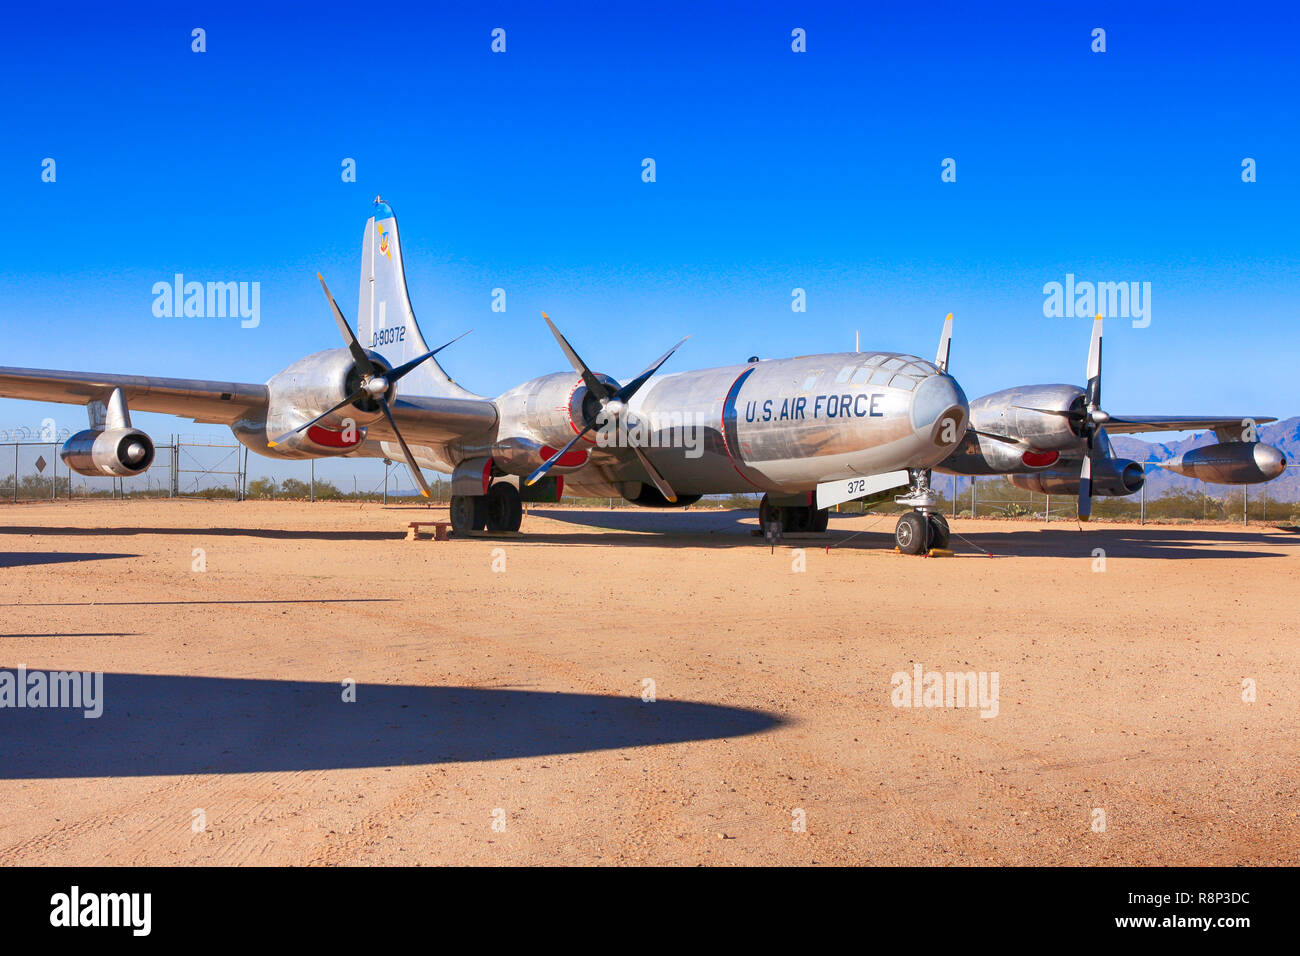 1948 Boeing B-50 Superfortress bomber plane on display at the Pima Air & Space Museum in Tucson, AZ Stock Photo